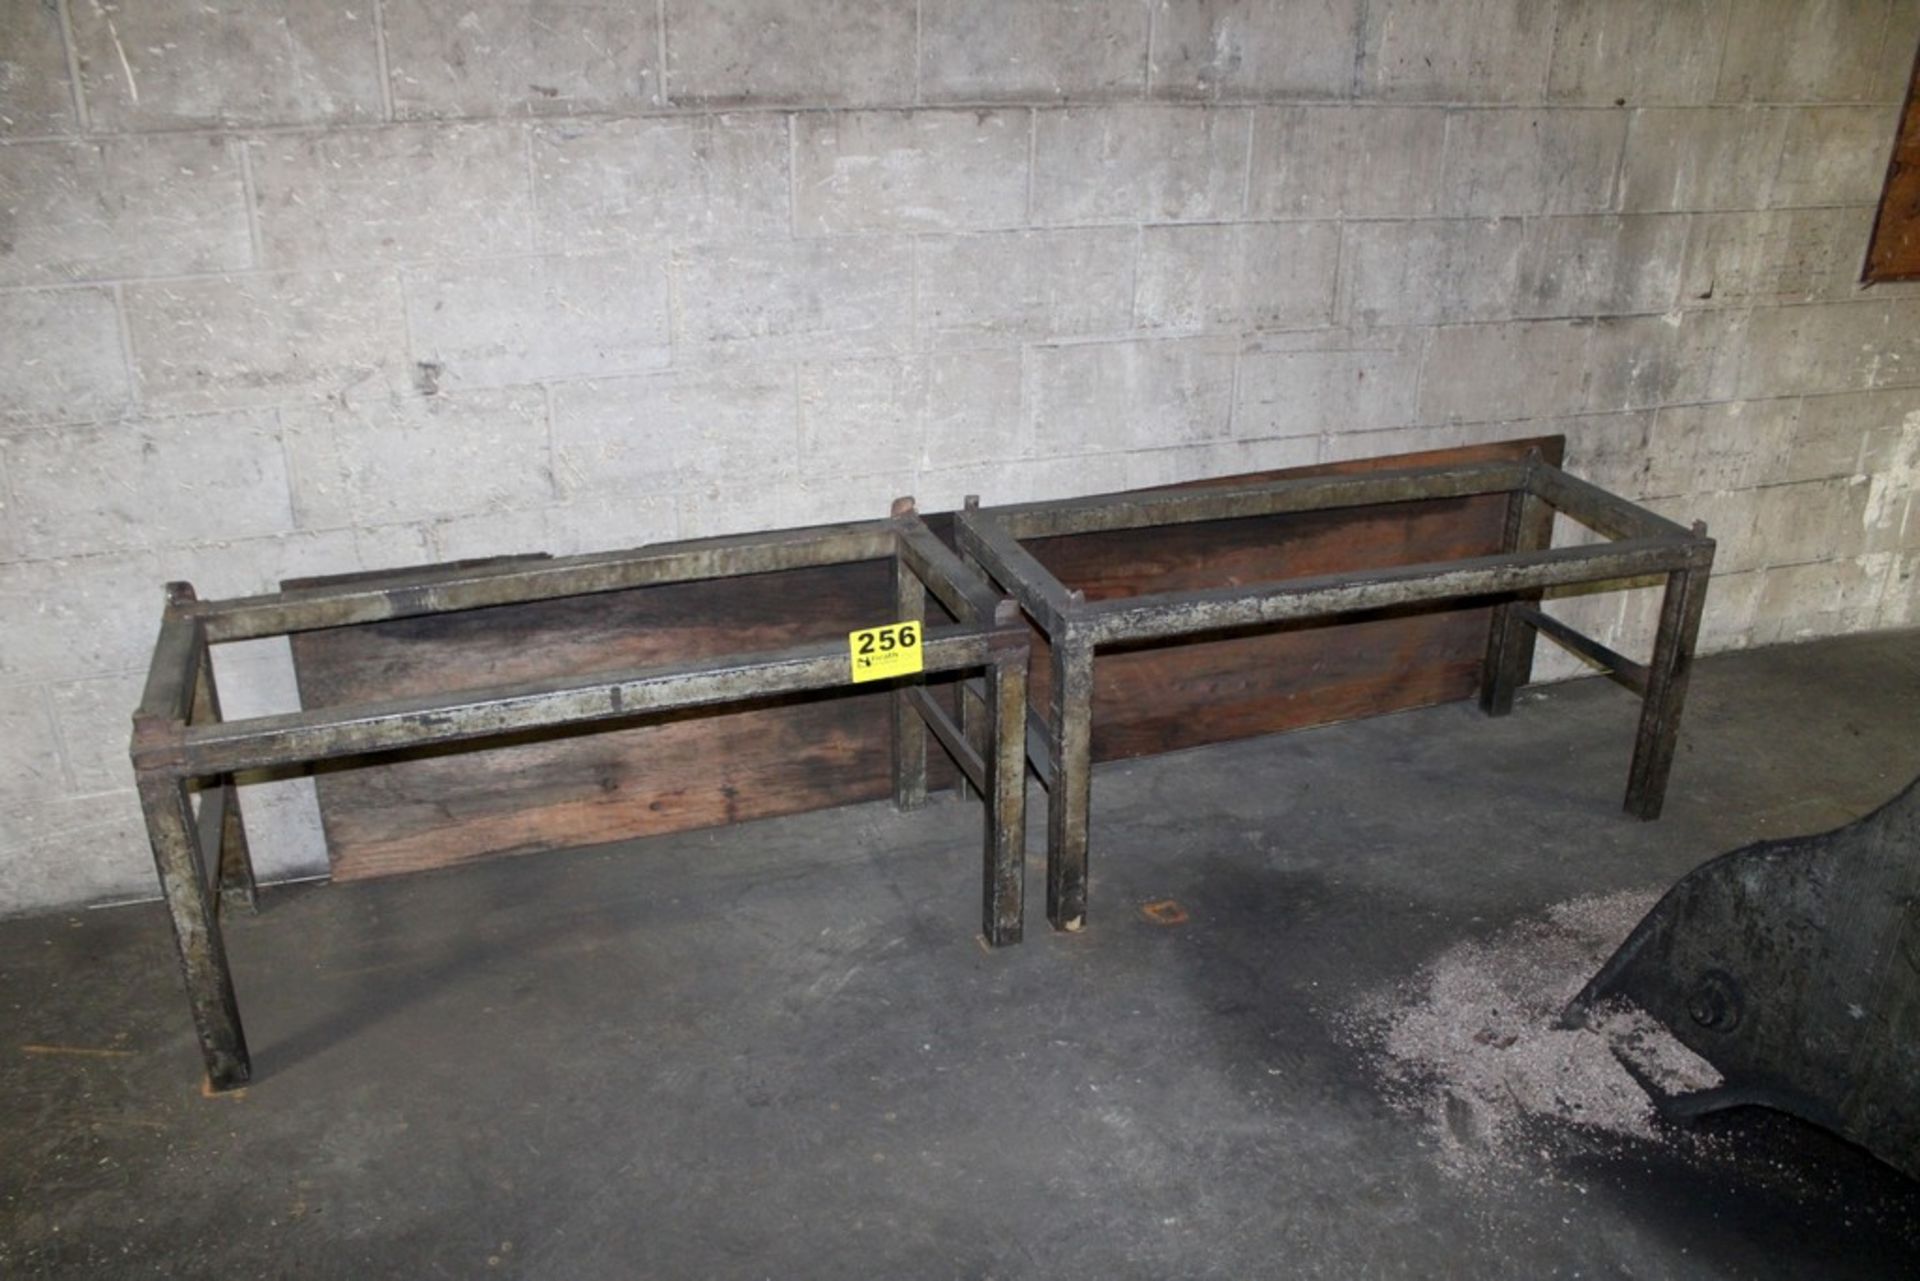 (2) Steel Stacking Material Stands 48" x 20" x 21" H